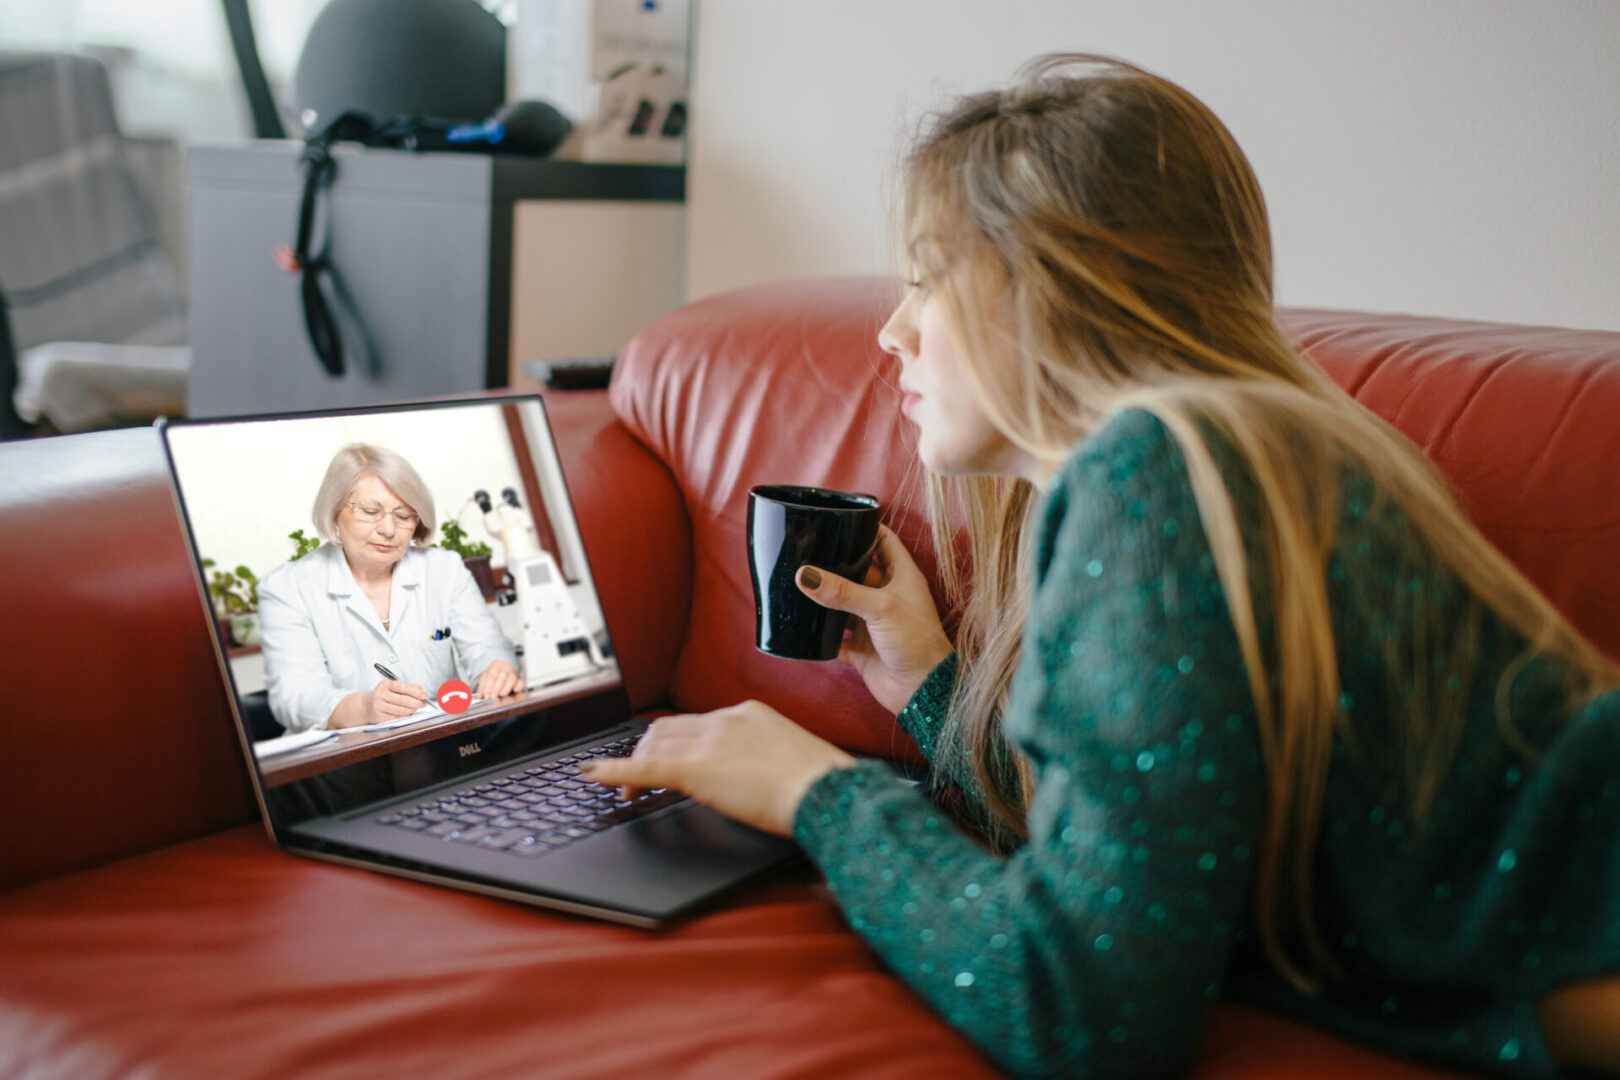 Telemedicine doctor video conference call online talking for follow up remotely with medical coronavirus result at home. Online healthcare digital technology service, counselor and interview app.